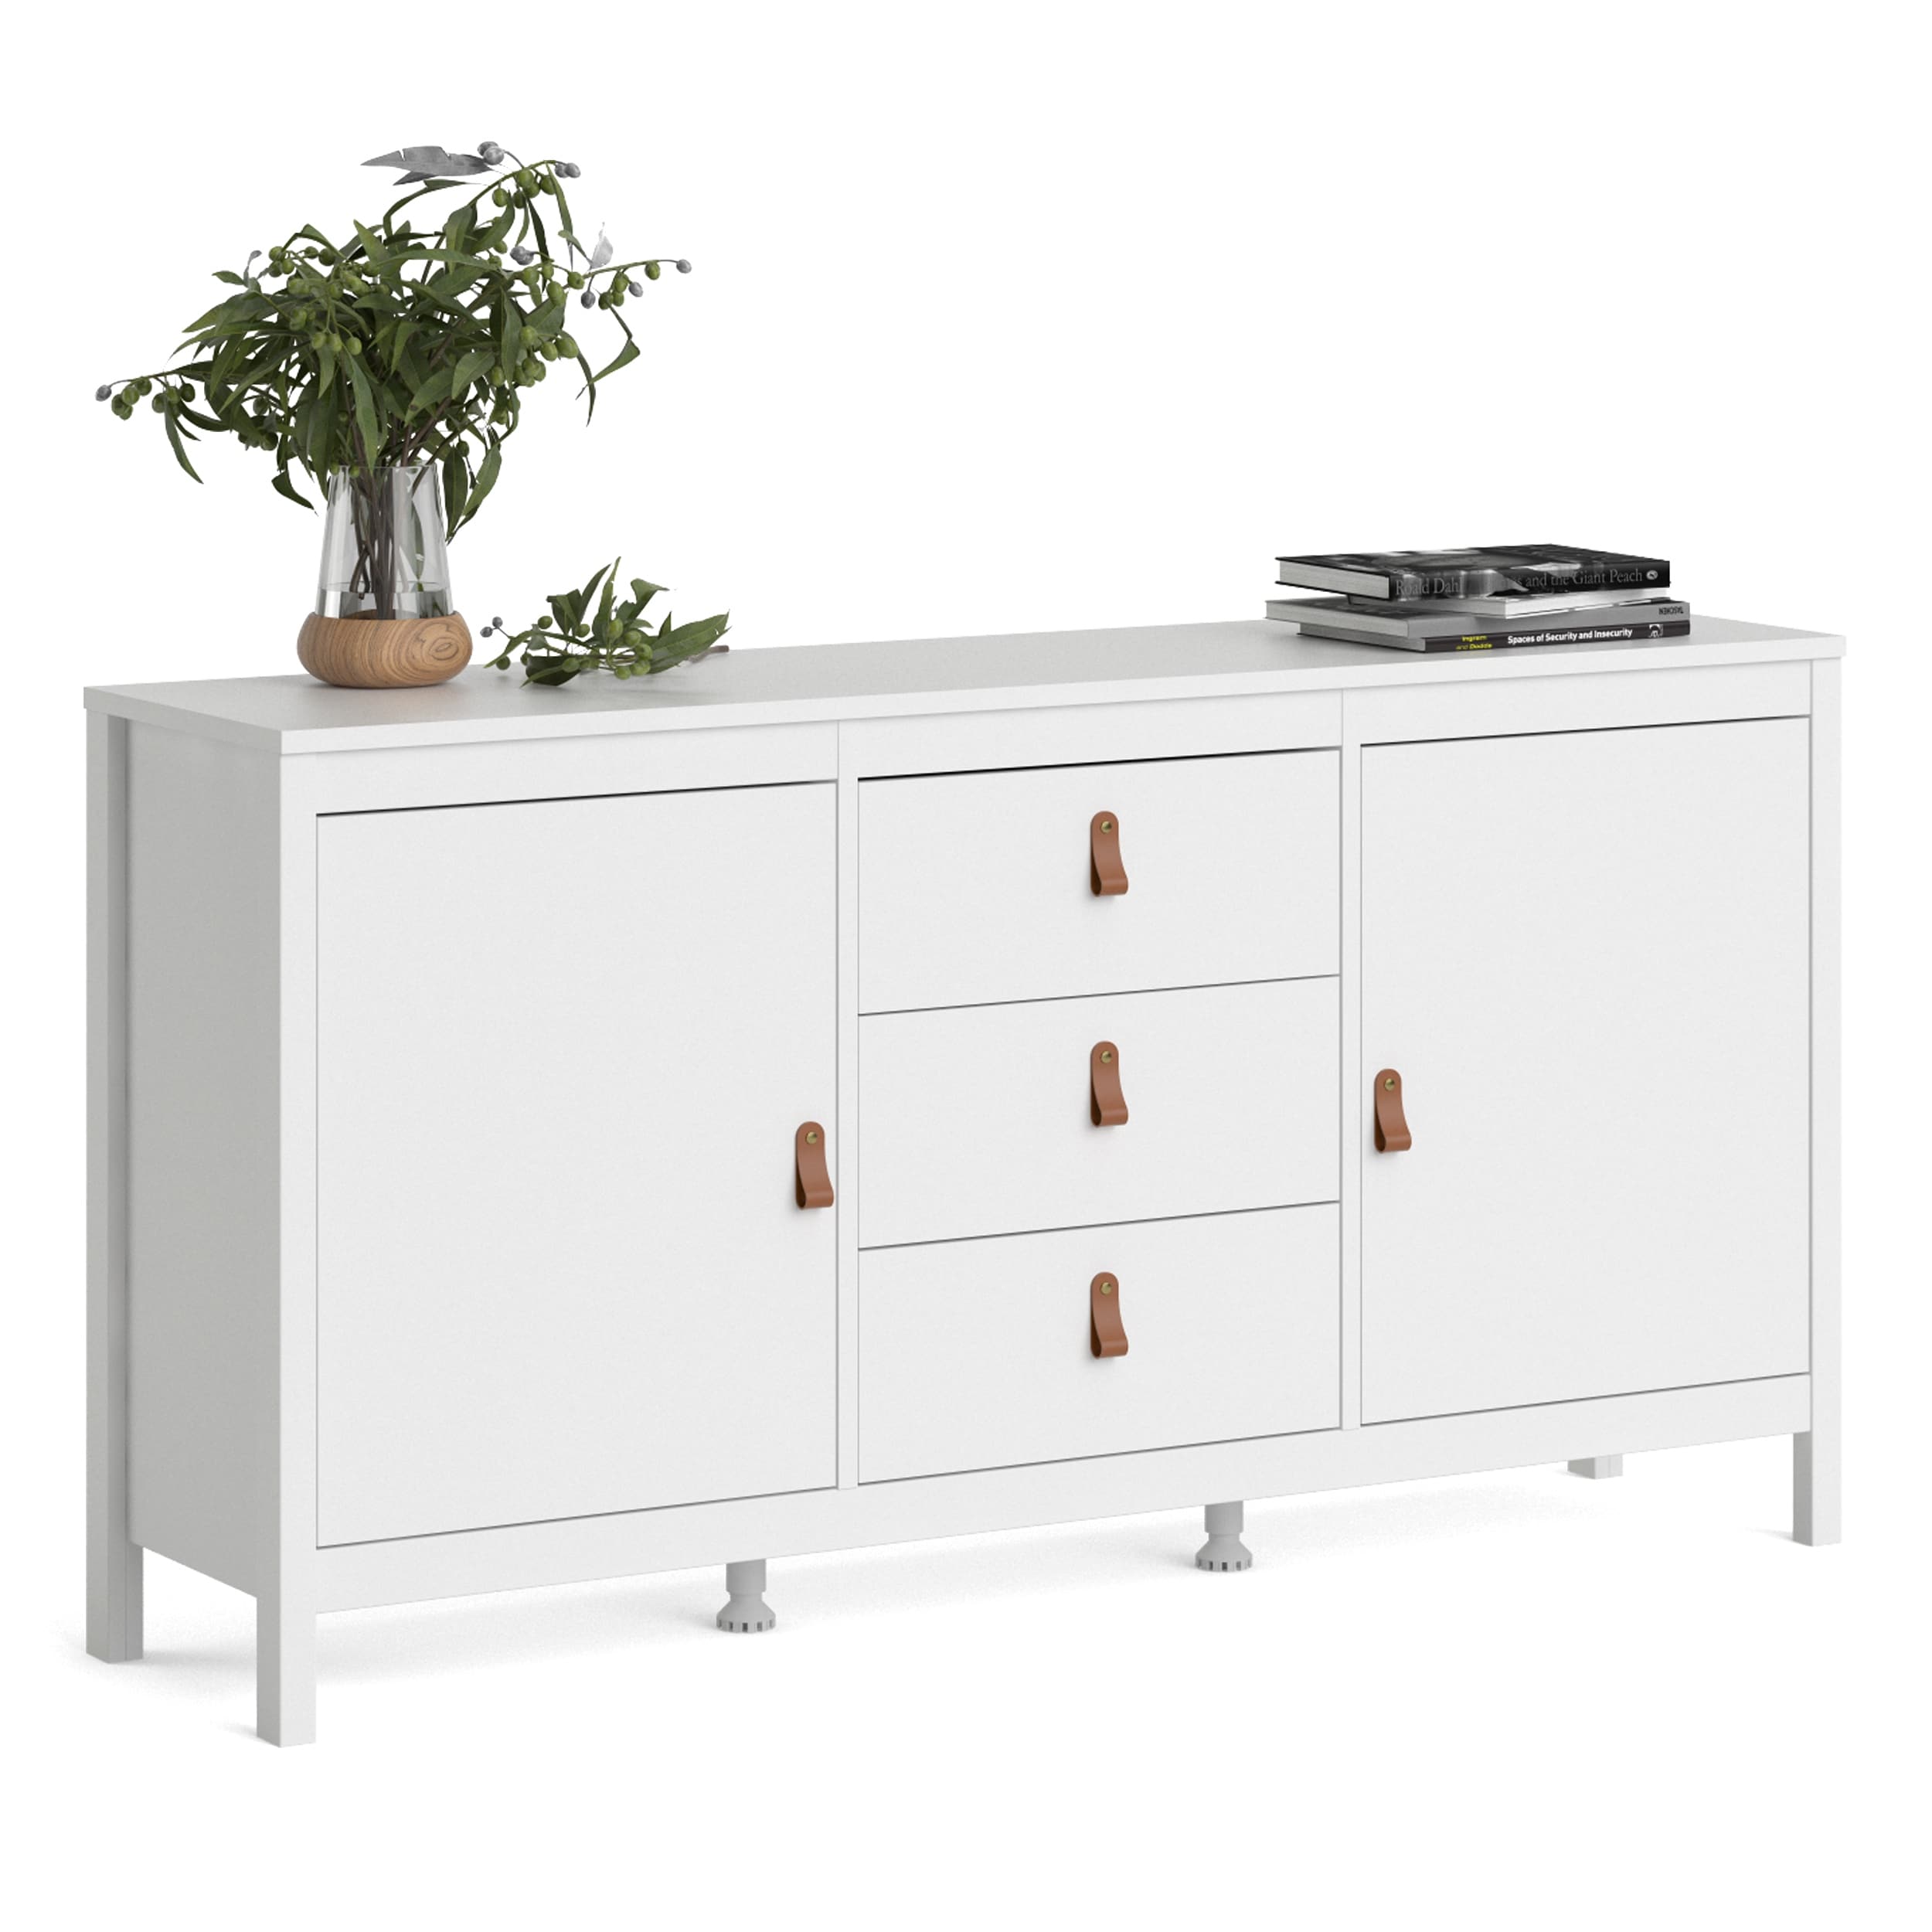 Den - 2-Door & Porch Sale with Bed & Bath 3-Drawers - 33673465 On Sideboard - Madrid Beyond